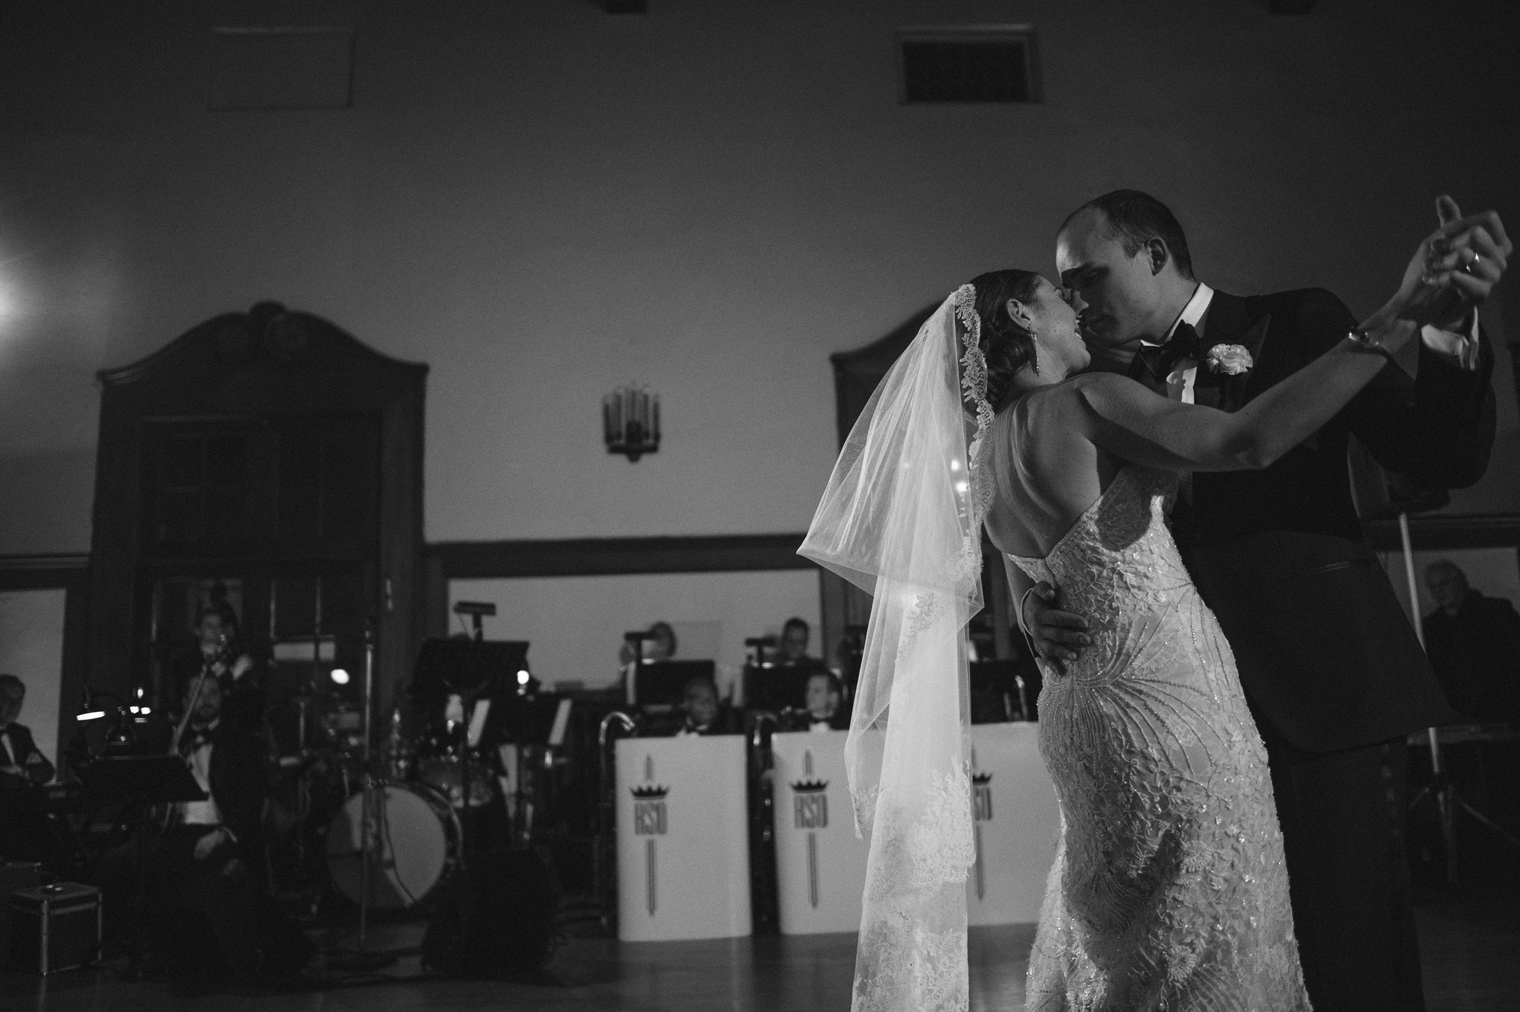 The bride and groom share their first dance at the Detroit Yacht Club wedding by Michigan photographer Heather Jowett.